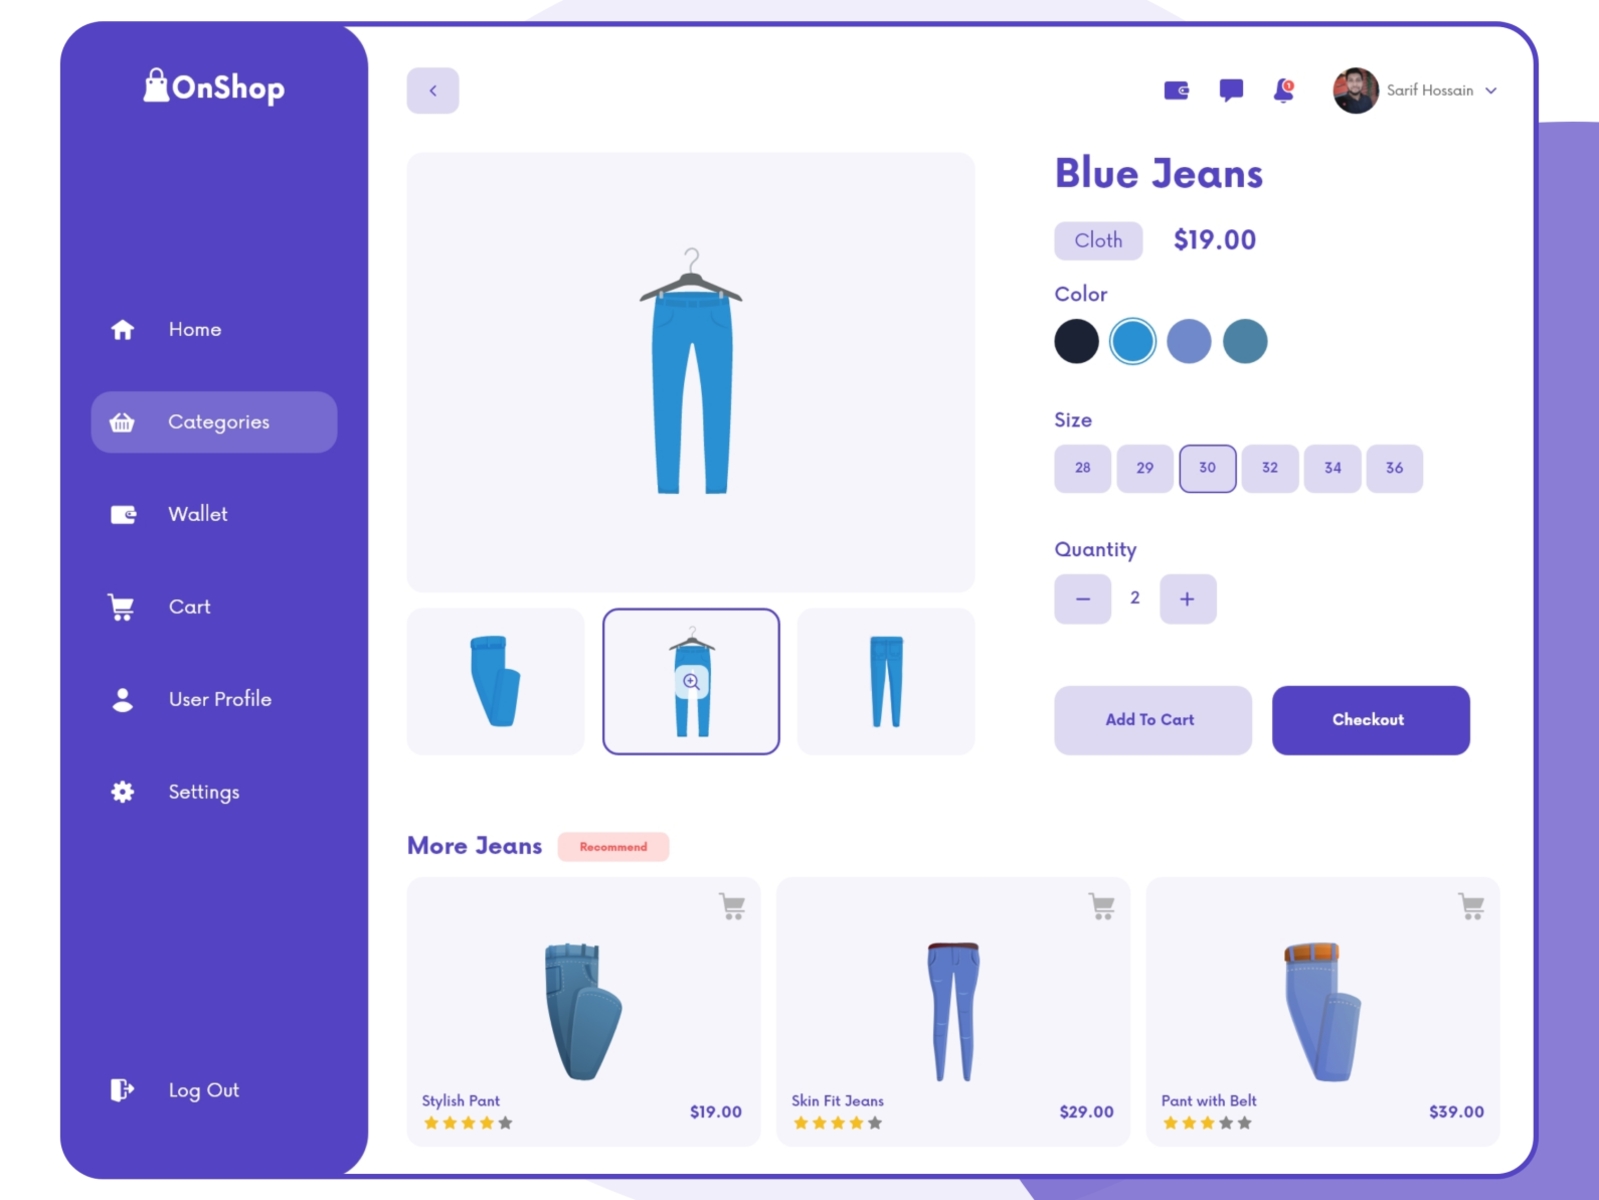 Product Page screen design idea #43: OnShop-Product Buy Page